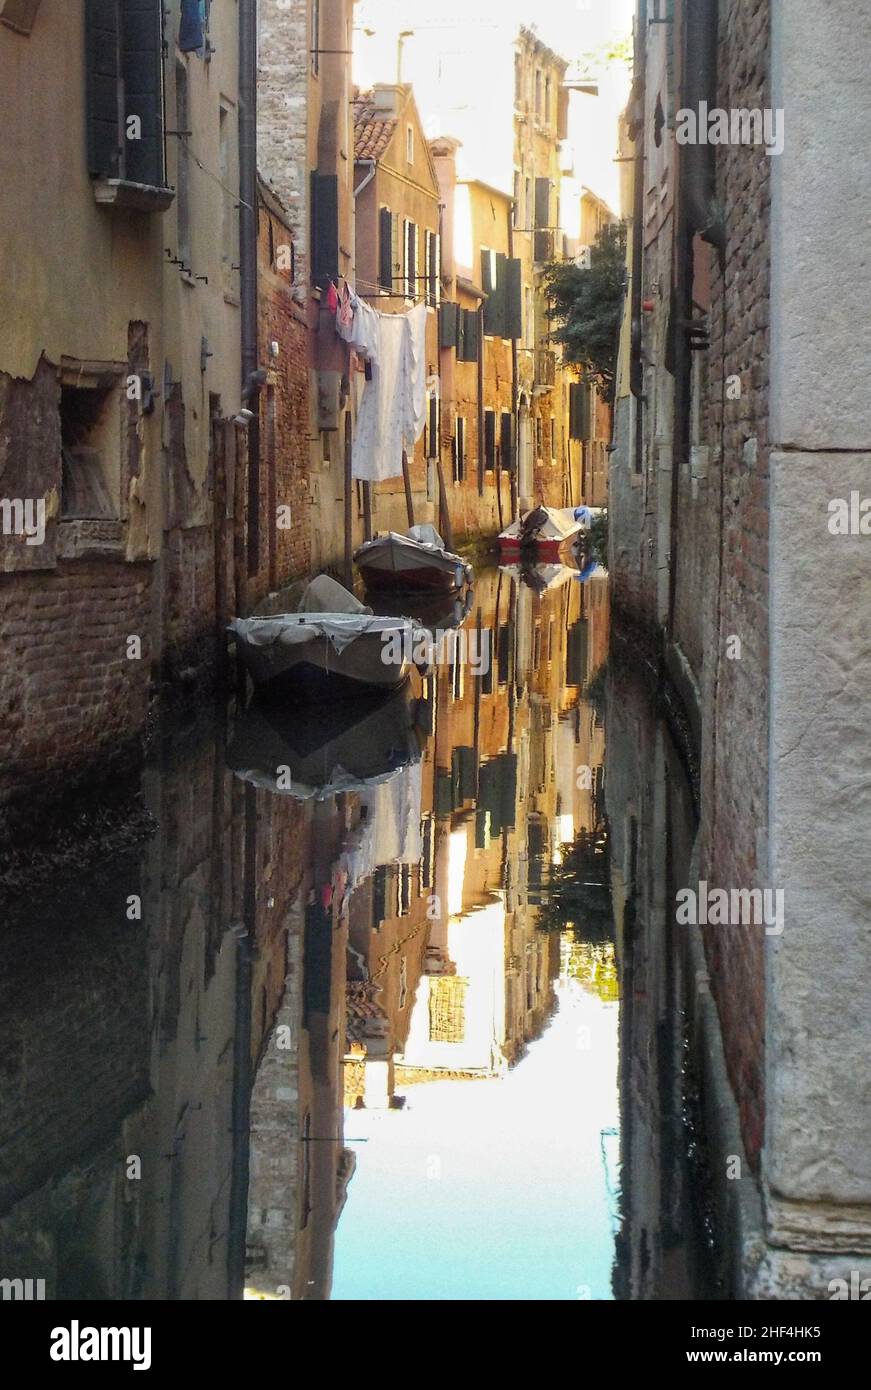 canal in Venice town with mooring boats and clothes hanging out the window Stock Photo